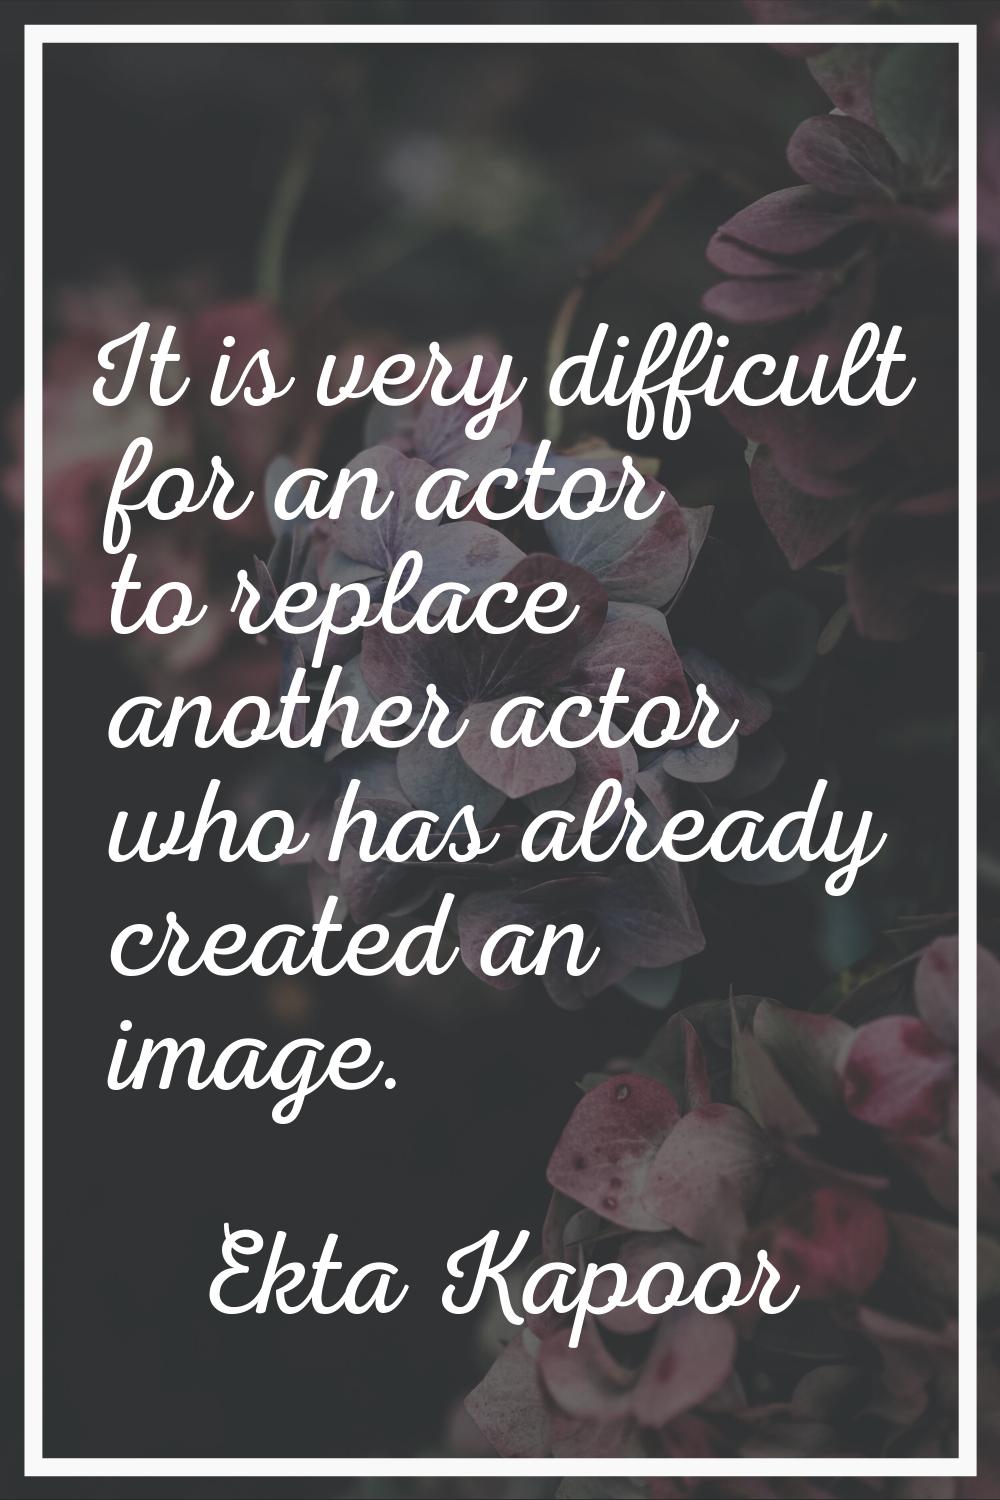 It is very difficult for an actor to replace another actor who has already created an image.